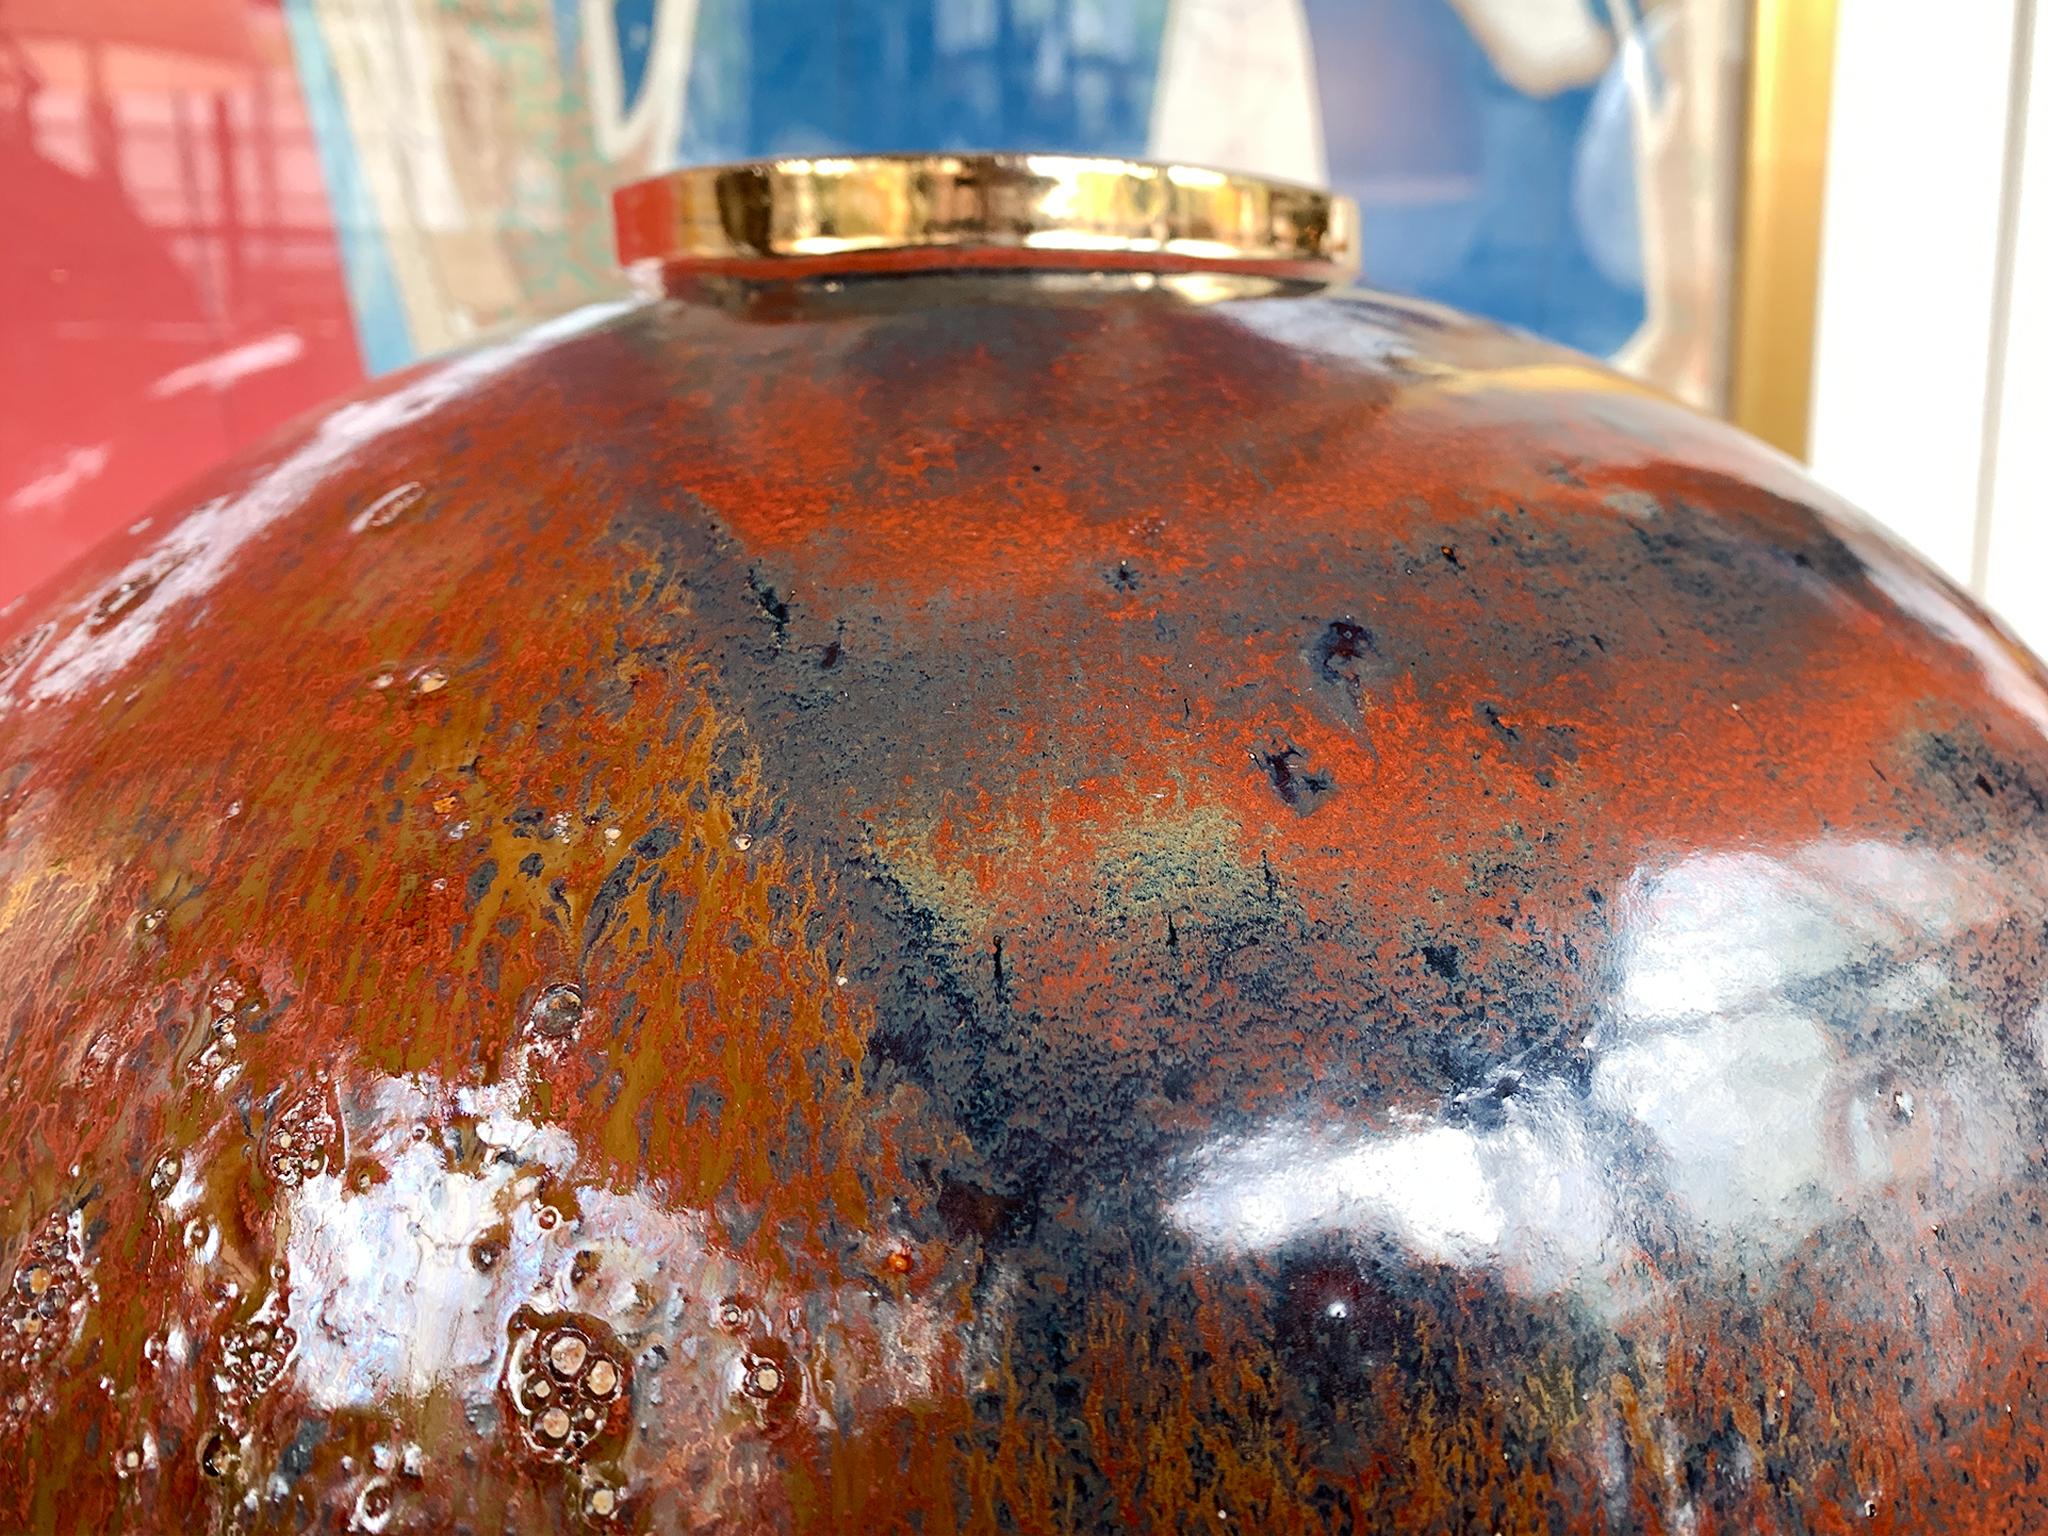 American Thom Lussier Ceramic Vessel #1 - From the Golden Patina Collection